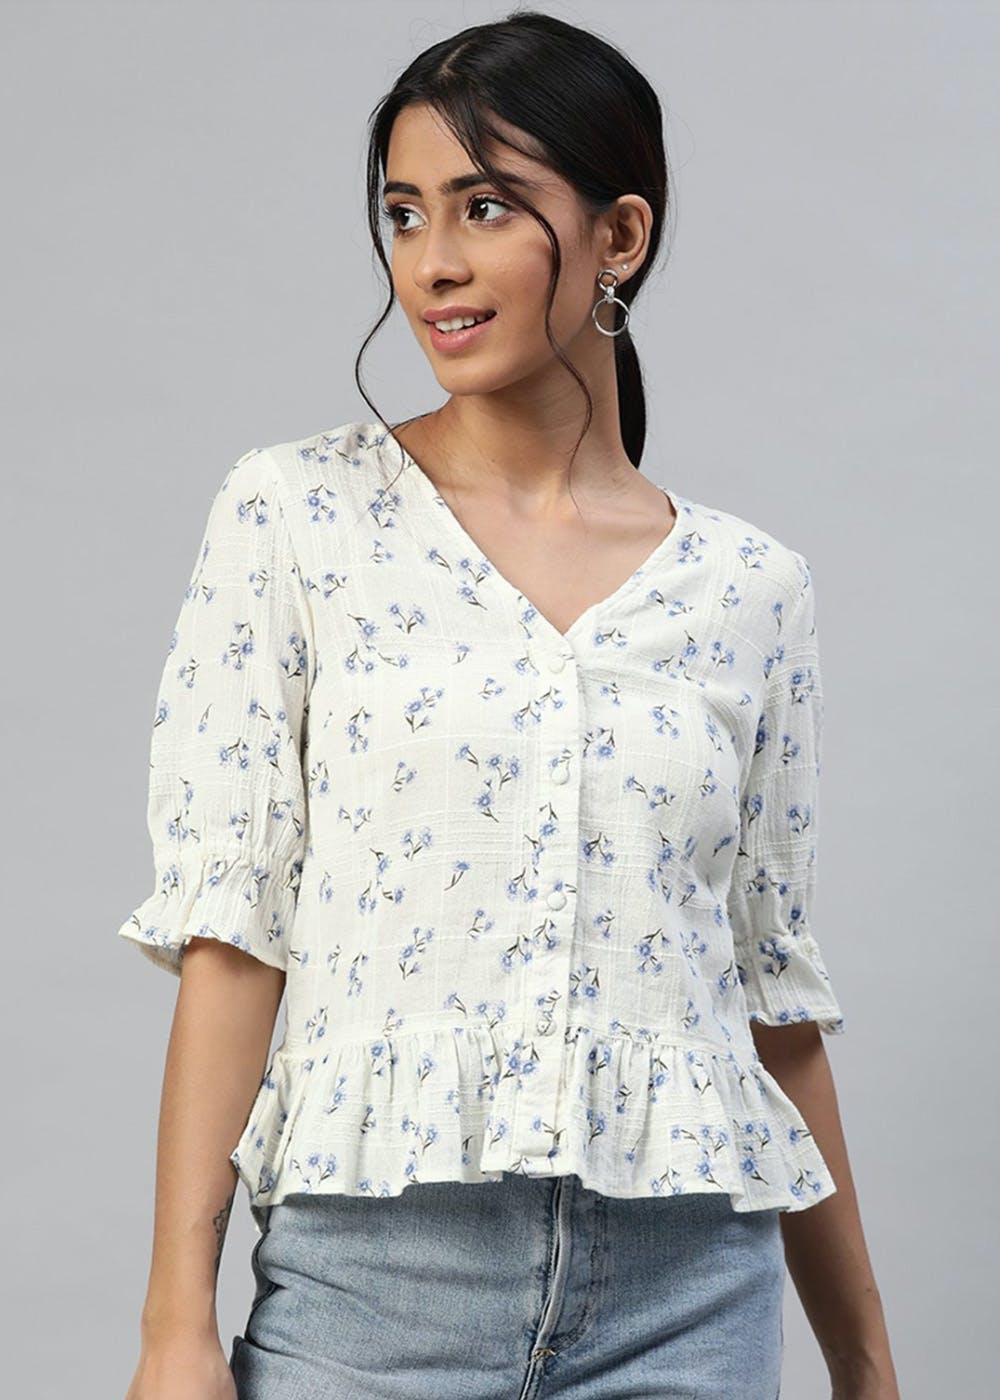 Get Floral Printed White Top at ₹ 1549 | LBB Shop